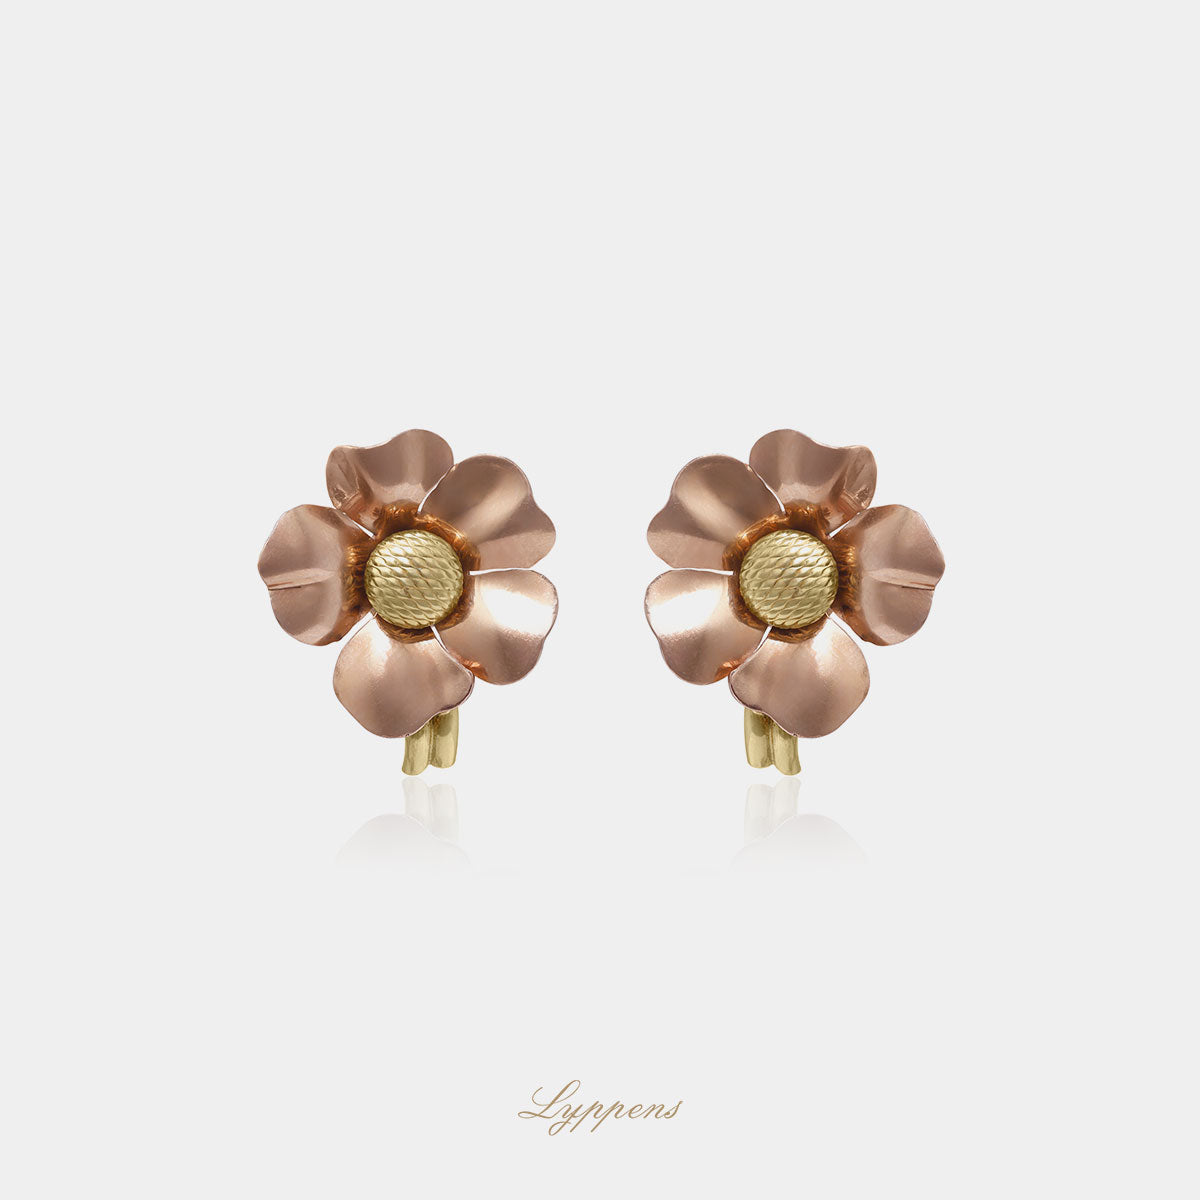 Rose and yellow gold vintage 1950s flower earrings